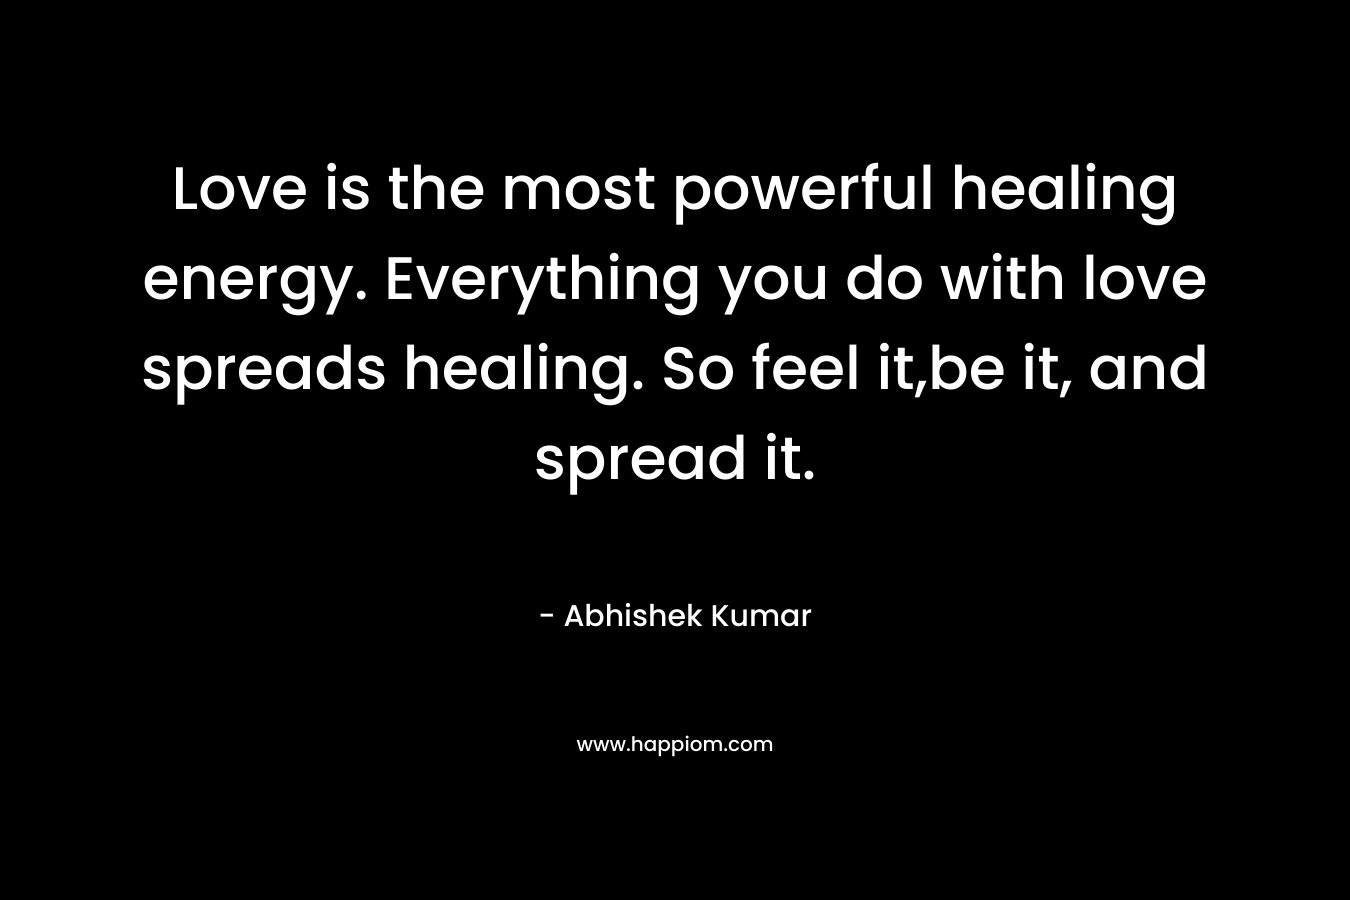 Love is the most powerful healing energy. Everything you do with love spreads healing. So feel it,be it, and spread it.